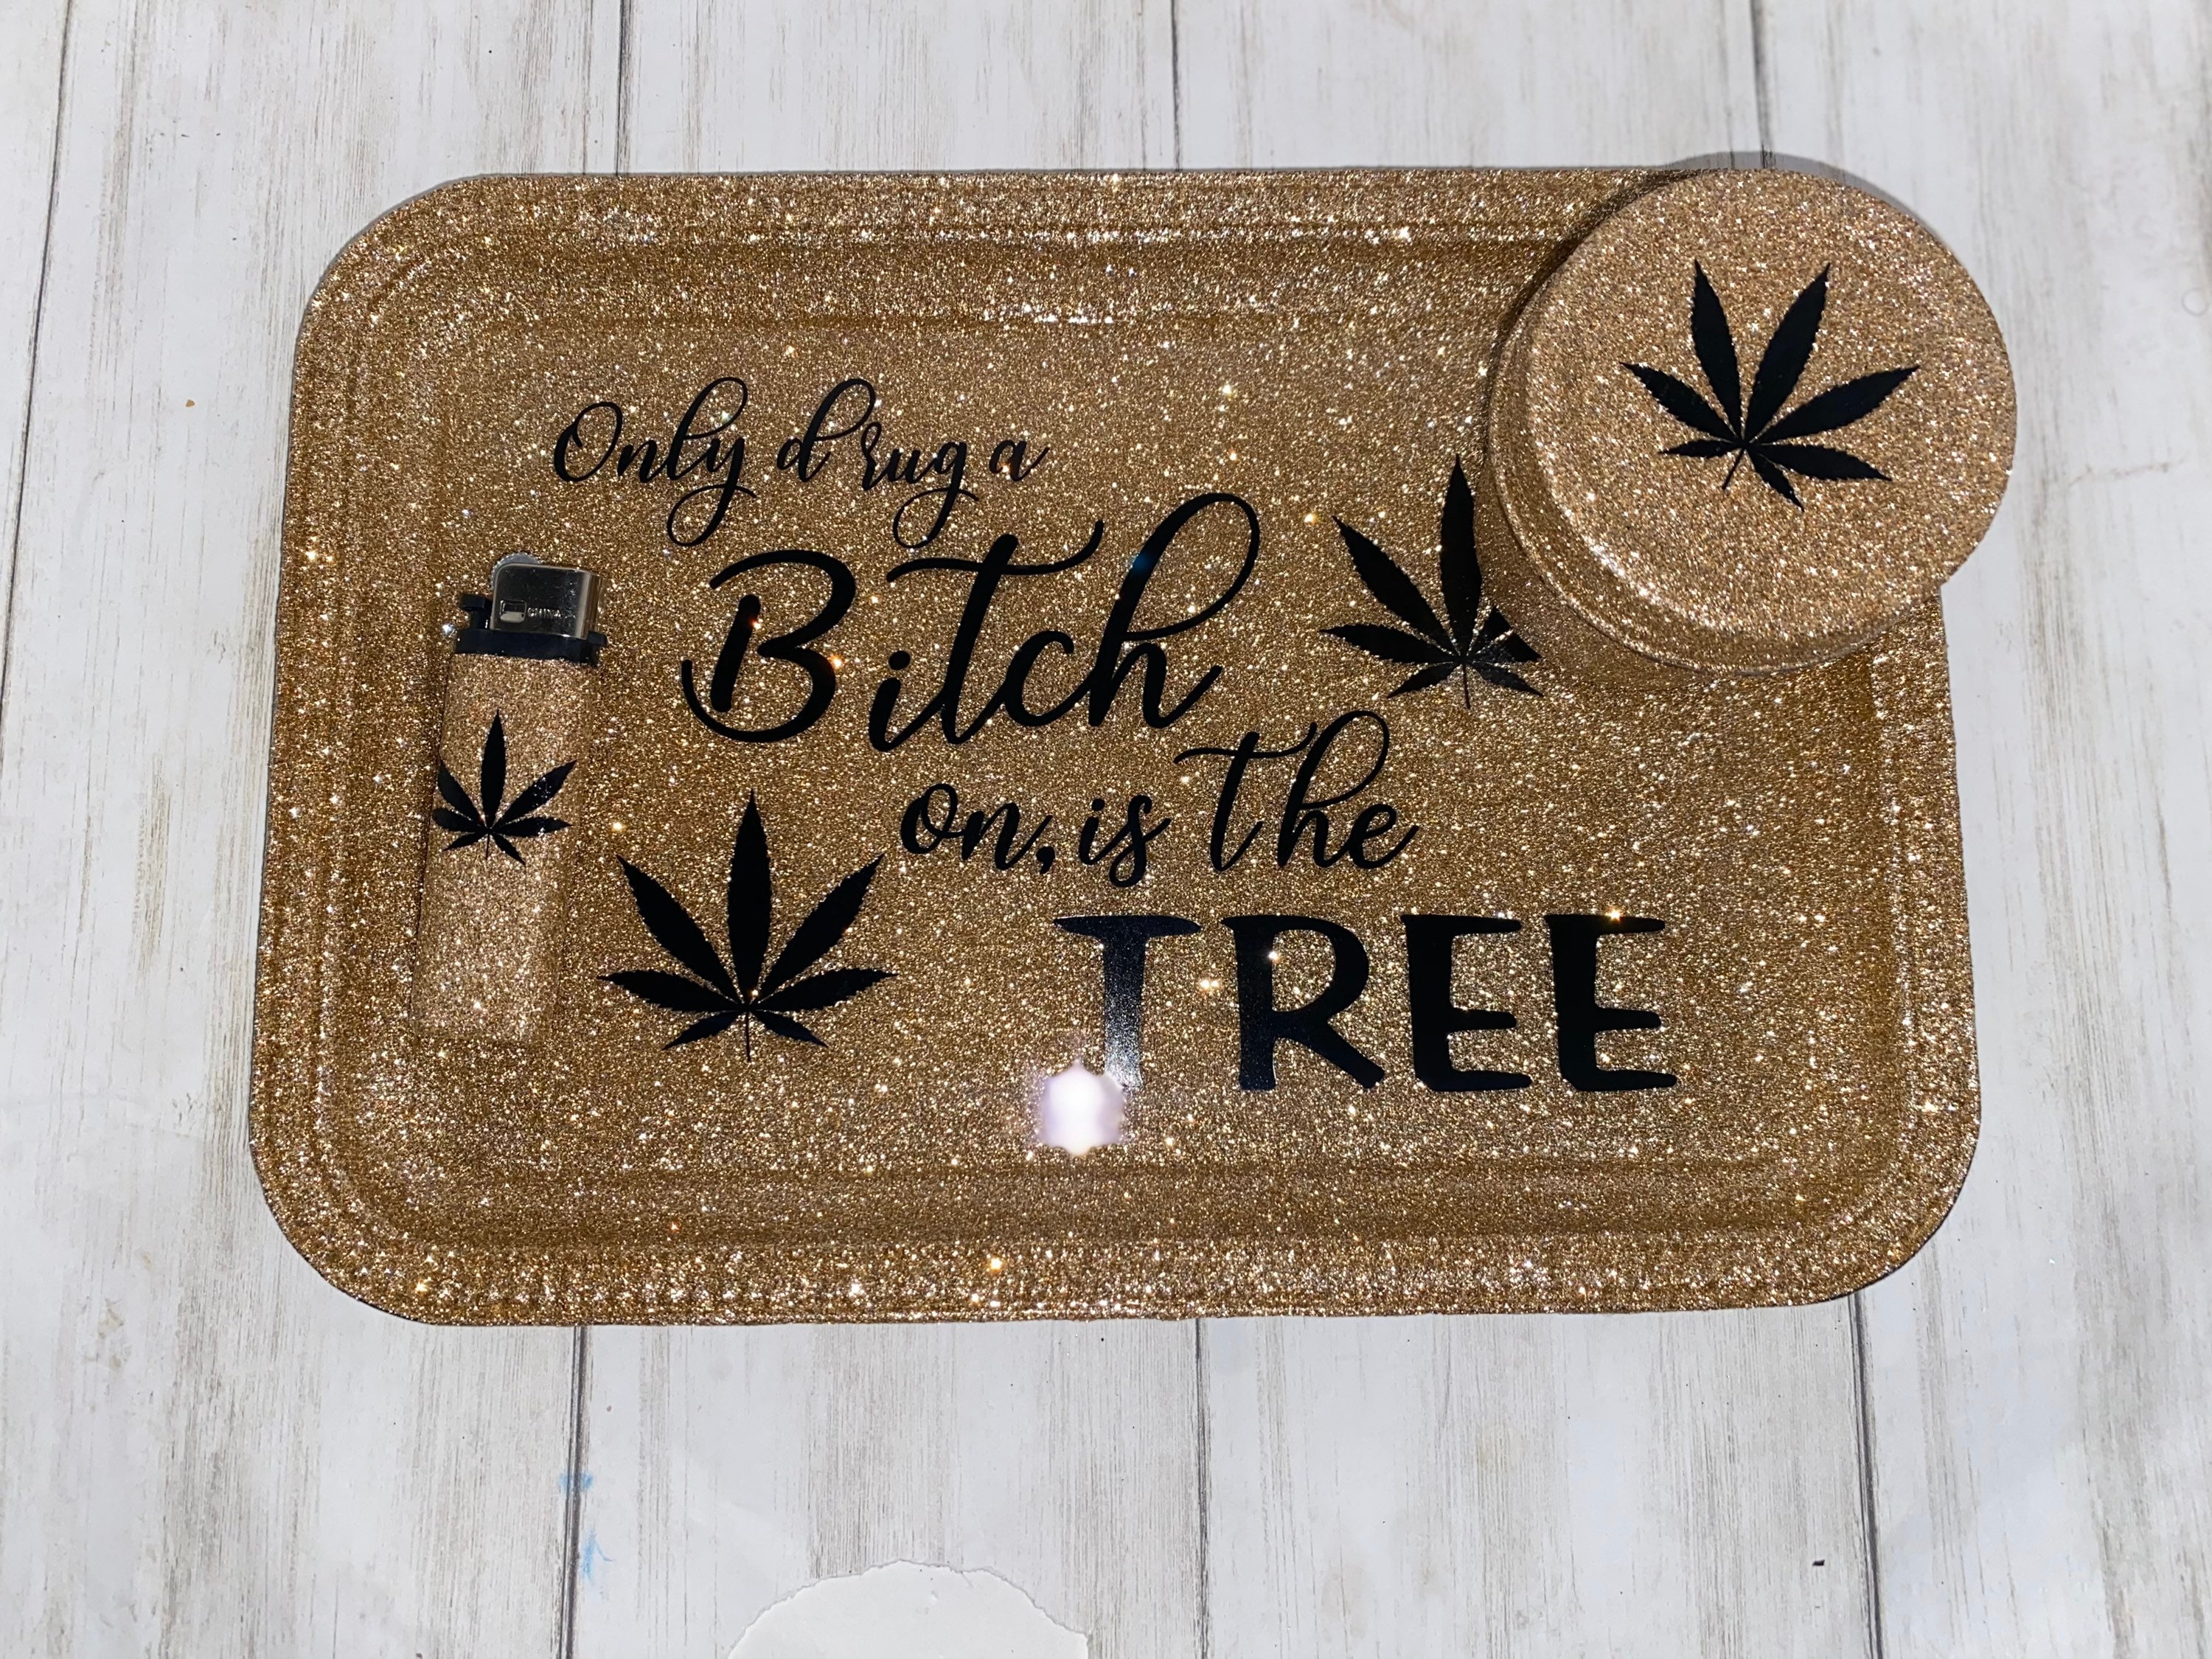 how to use a rolling tray